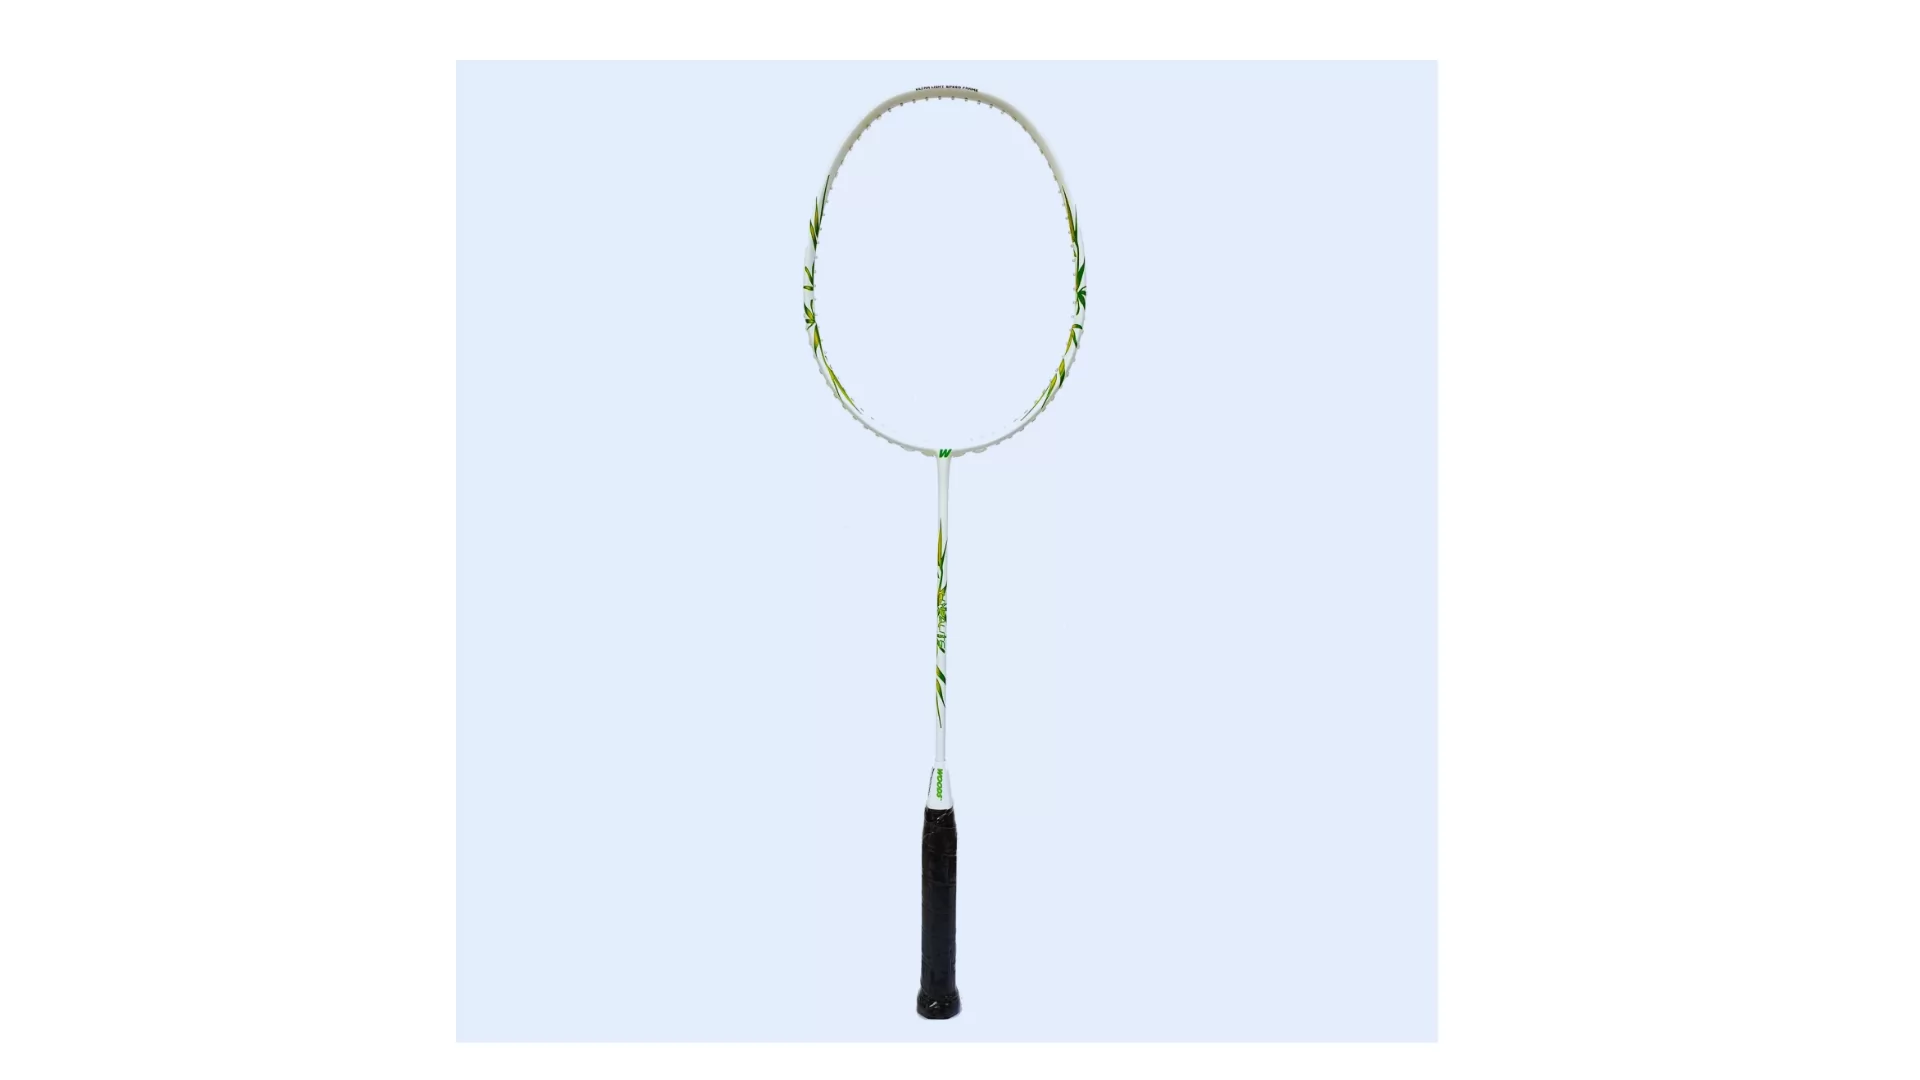 WOODS HYPALITE Badminton Racket Strung 3U G4 Without Cover